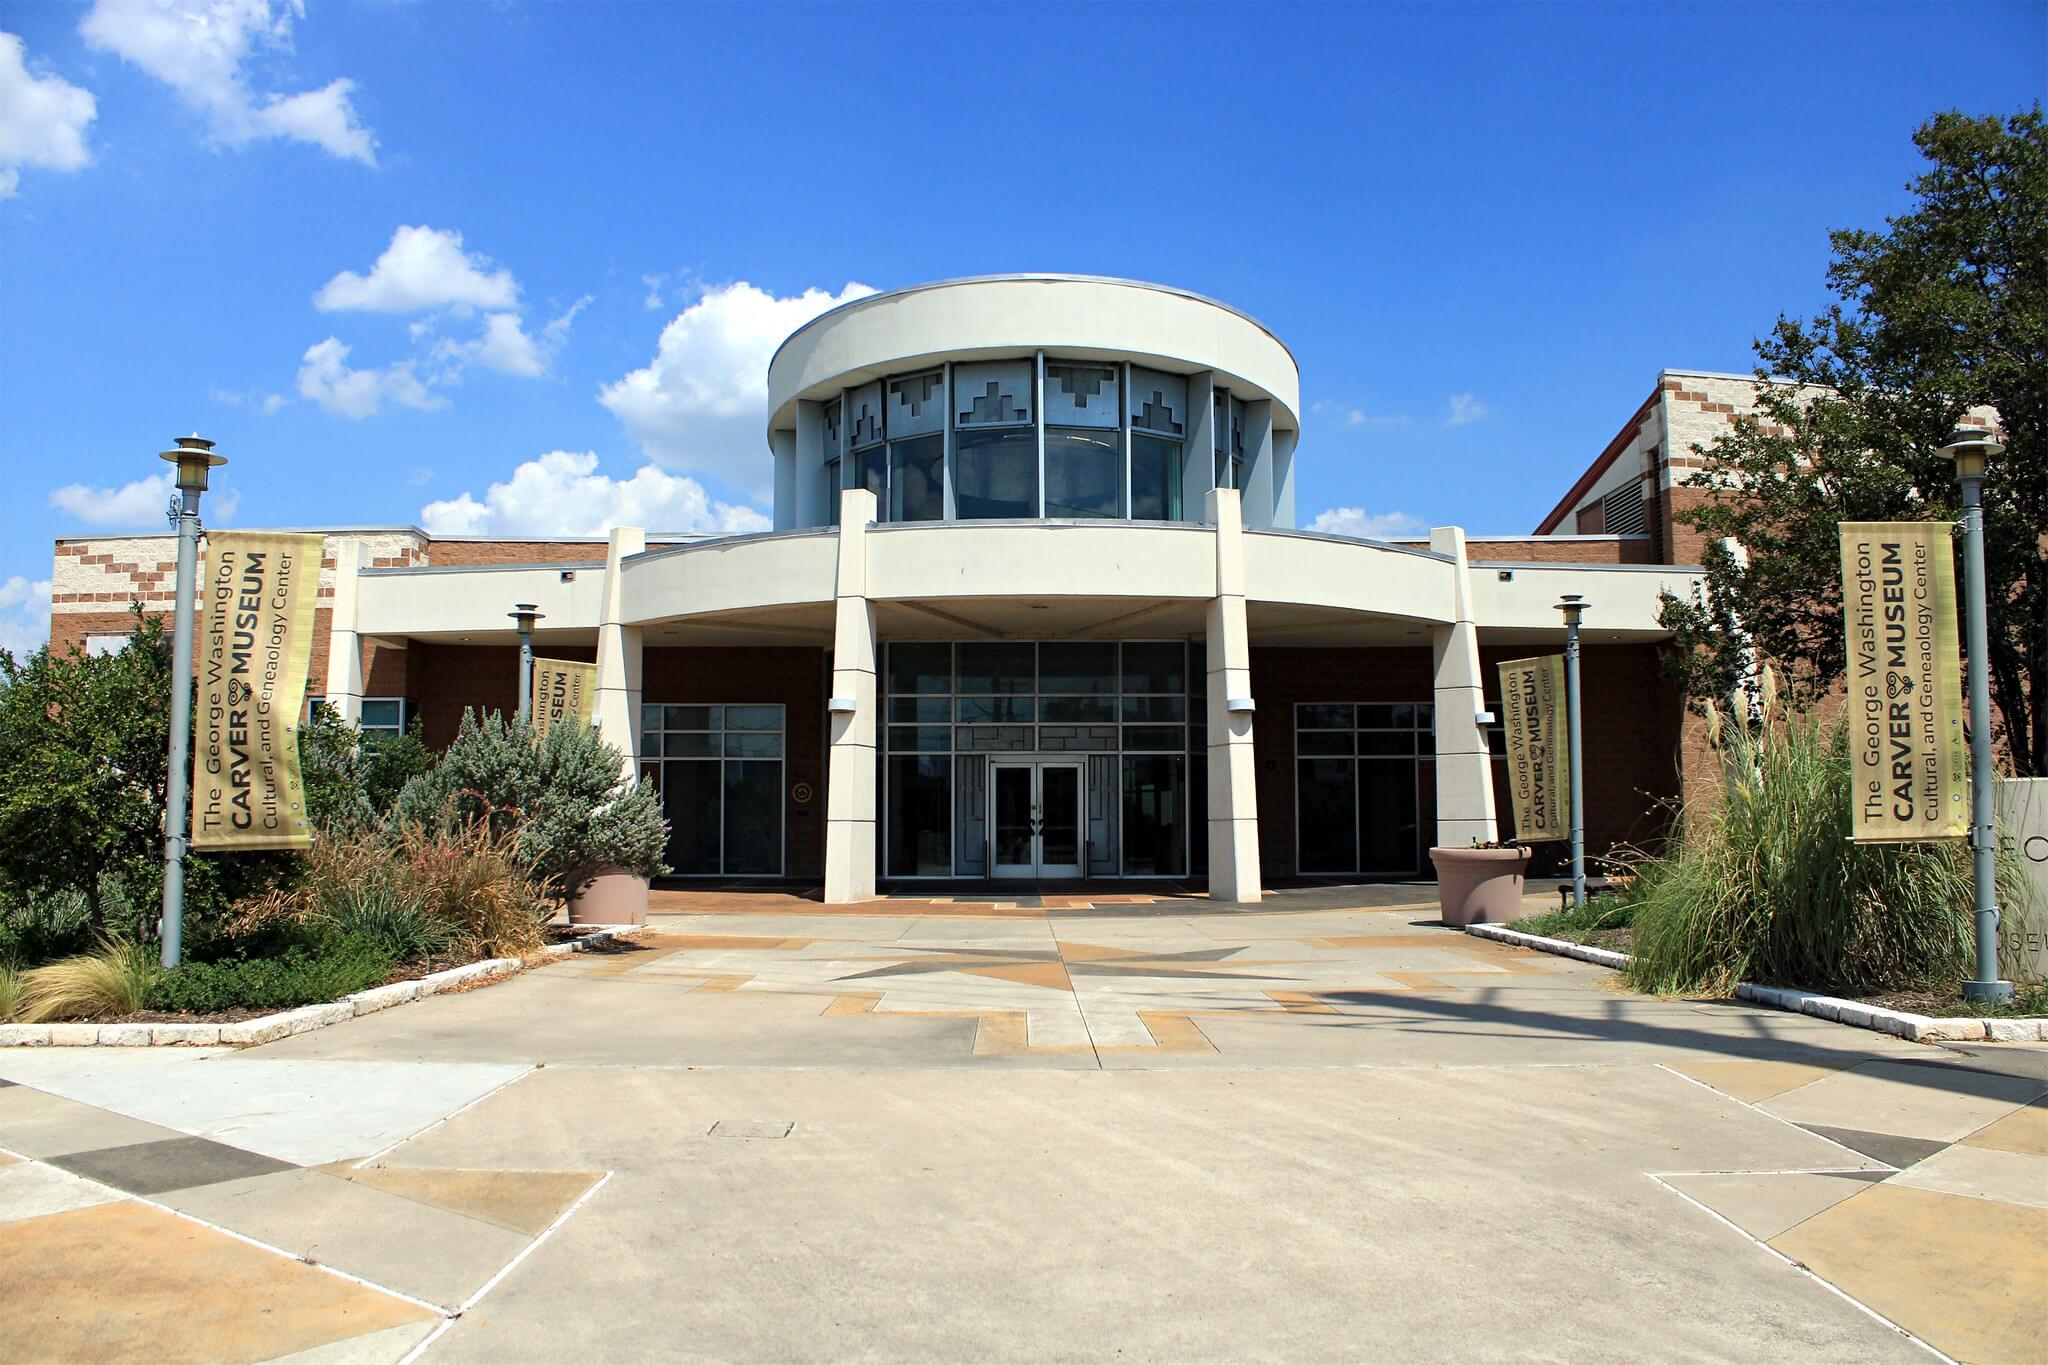 exterior of a museum and entrance plaza of the George Washington Carver Museum